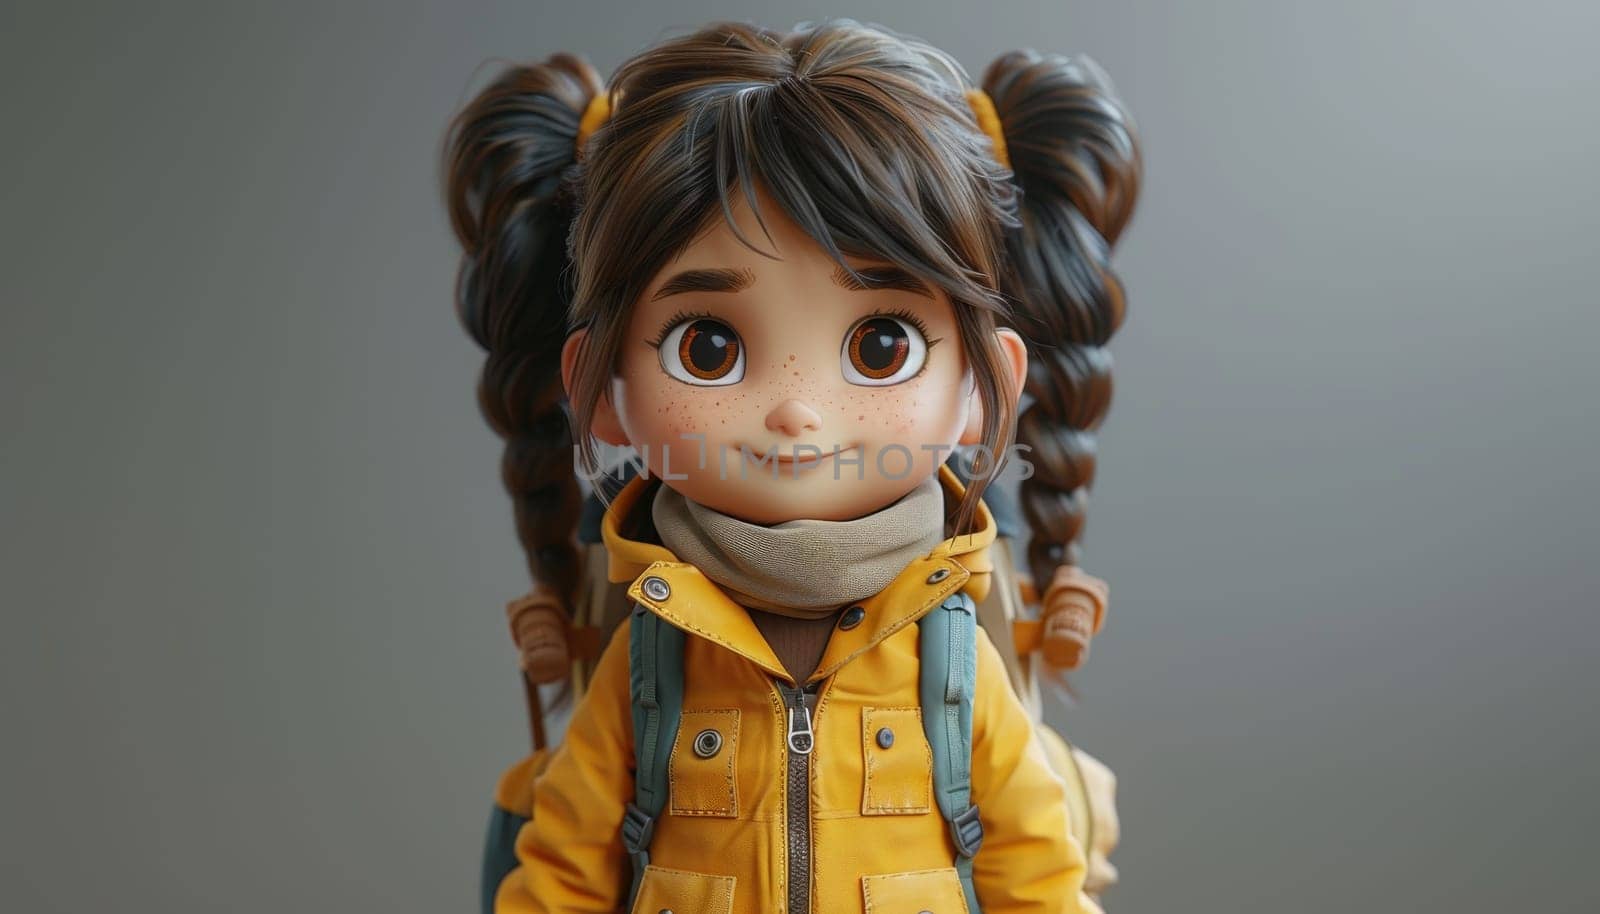 A girl doll is wearing a yellow scarf and a brown hat by AI generated image.